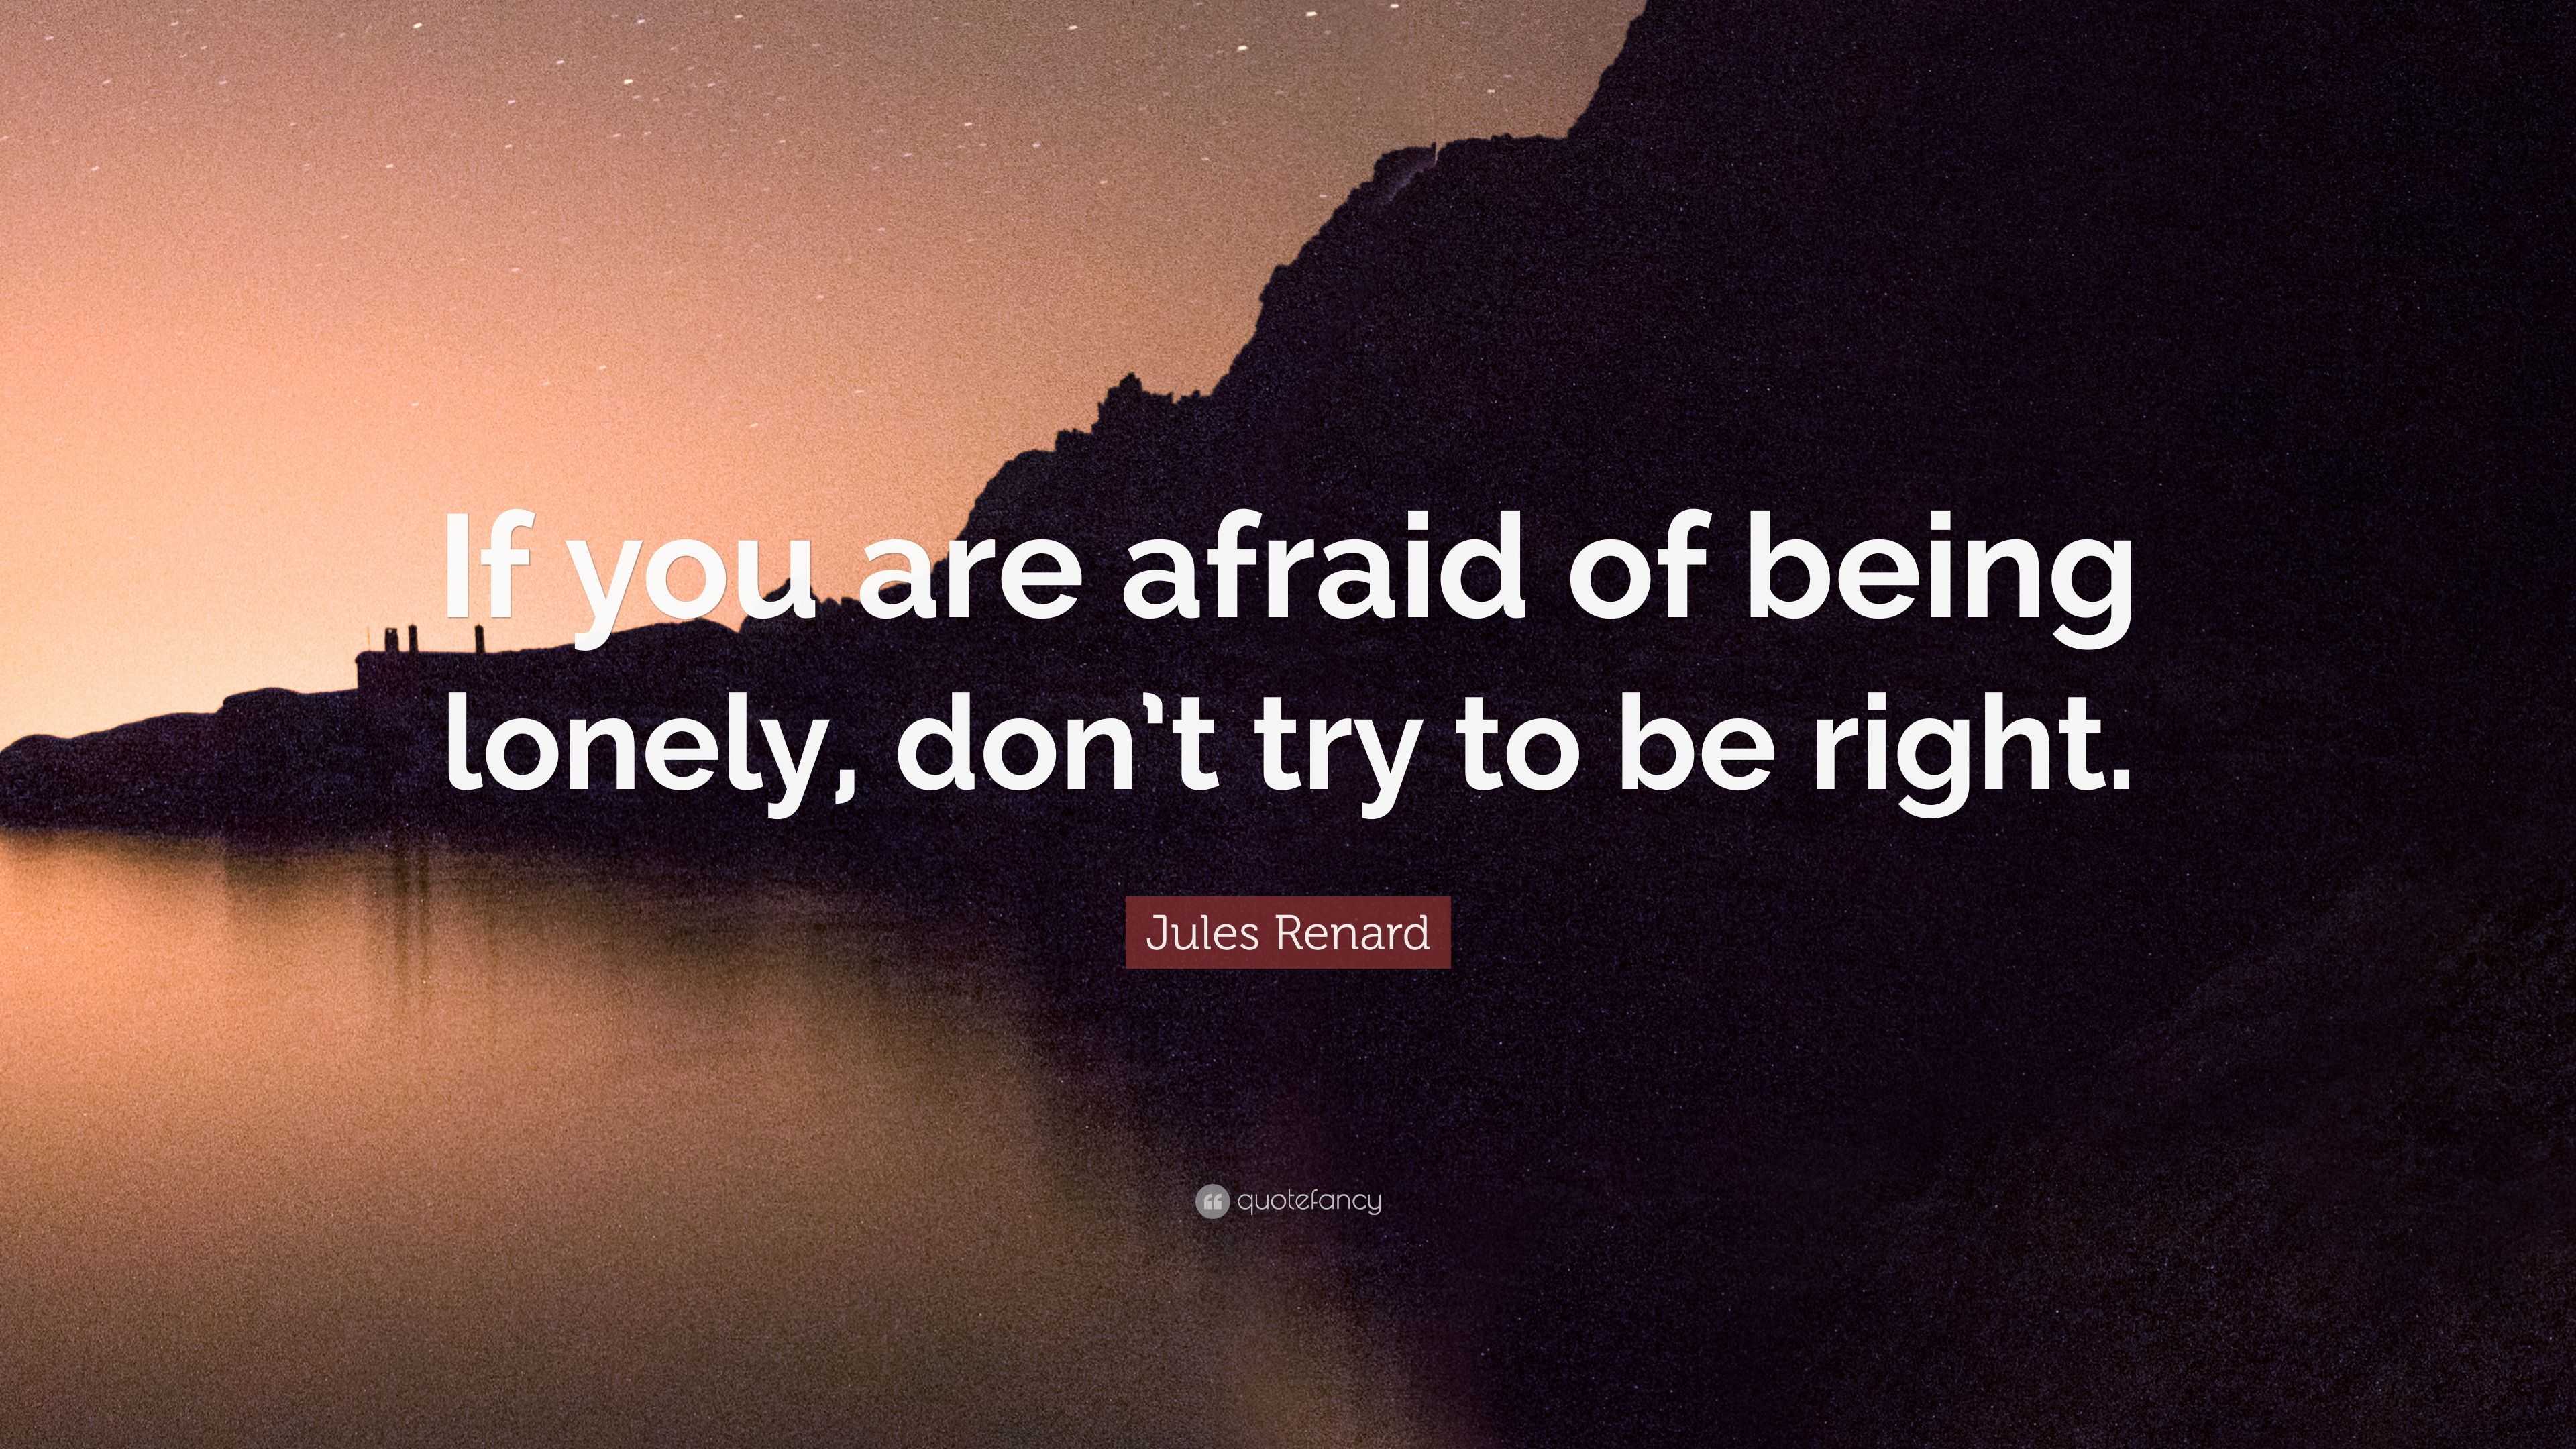 Jules Renard Quote: “If you are afraid of being lonely, don’t try to be ...